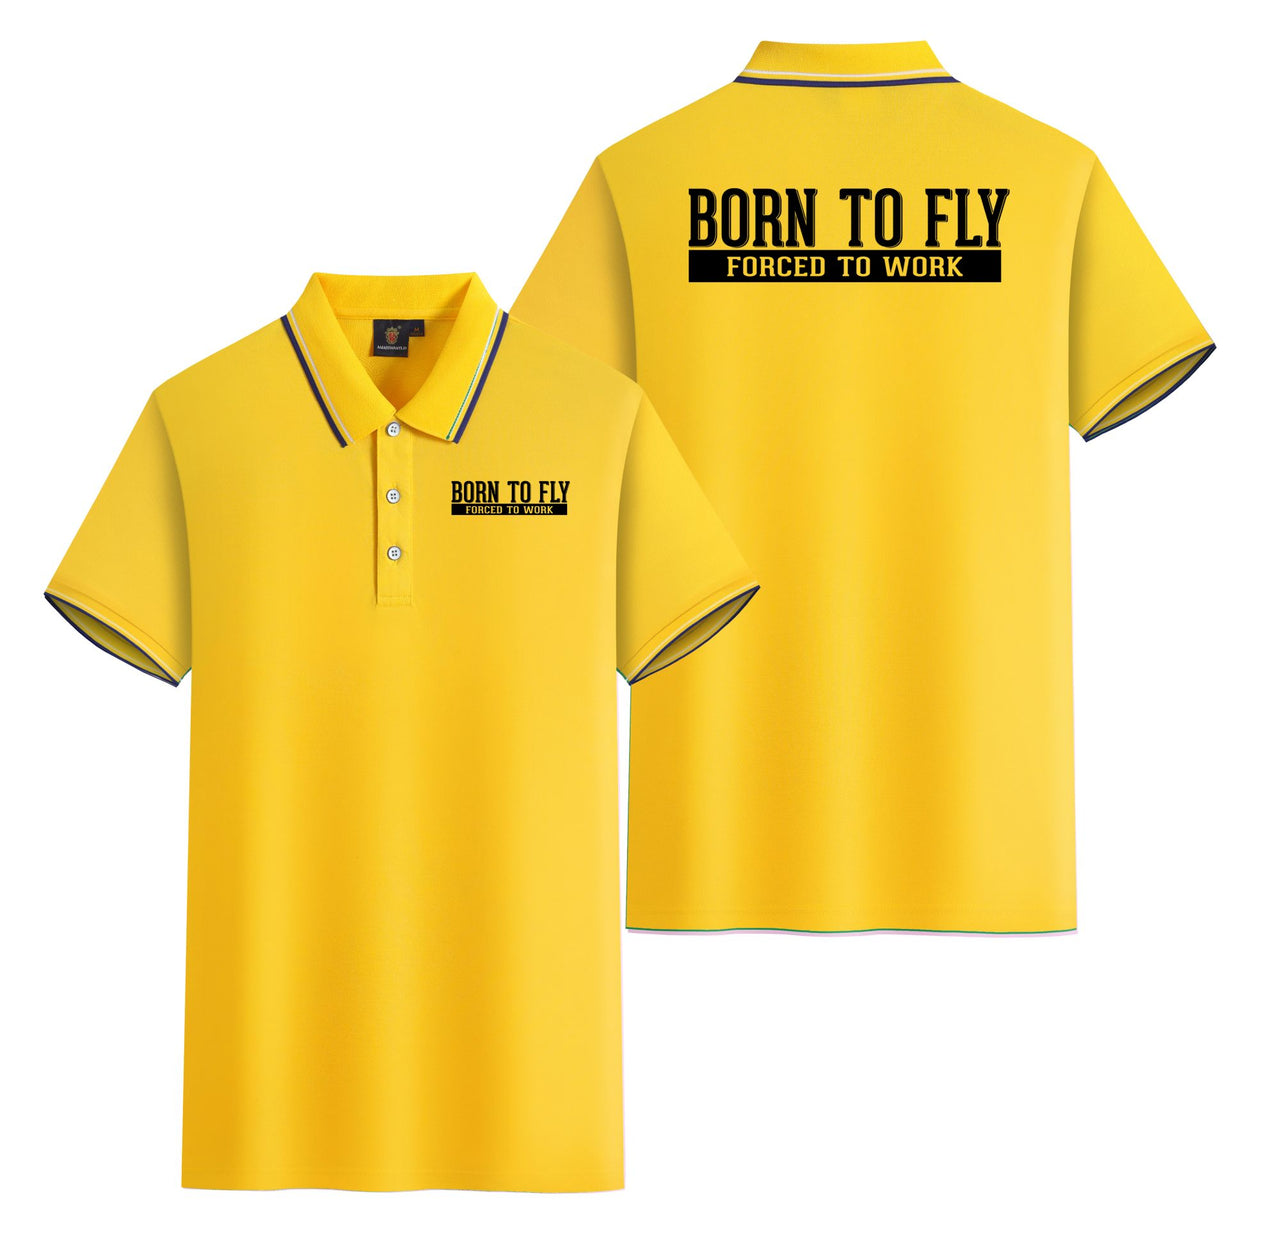 Born To Fly Forced To Work Designed Stylish Polo T-Shirts (Double-Side)